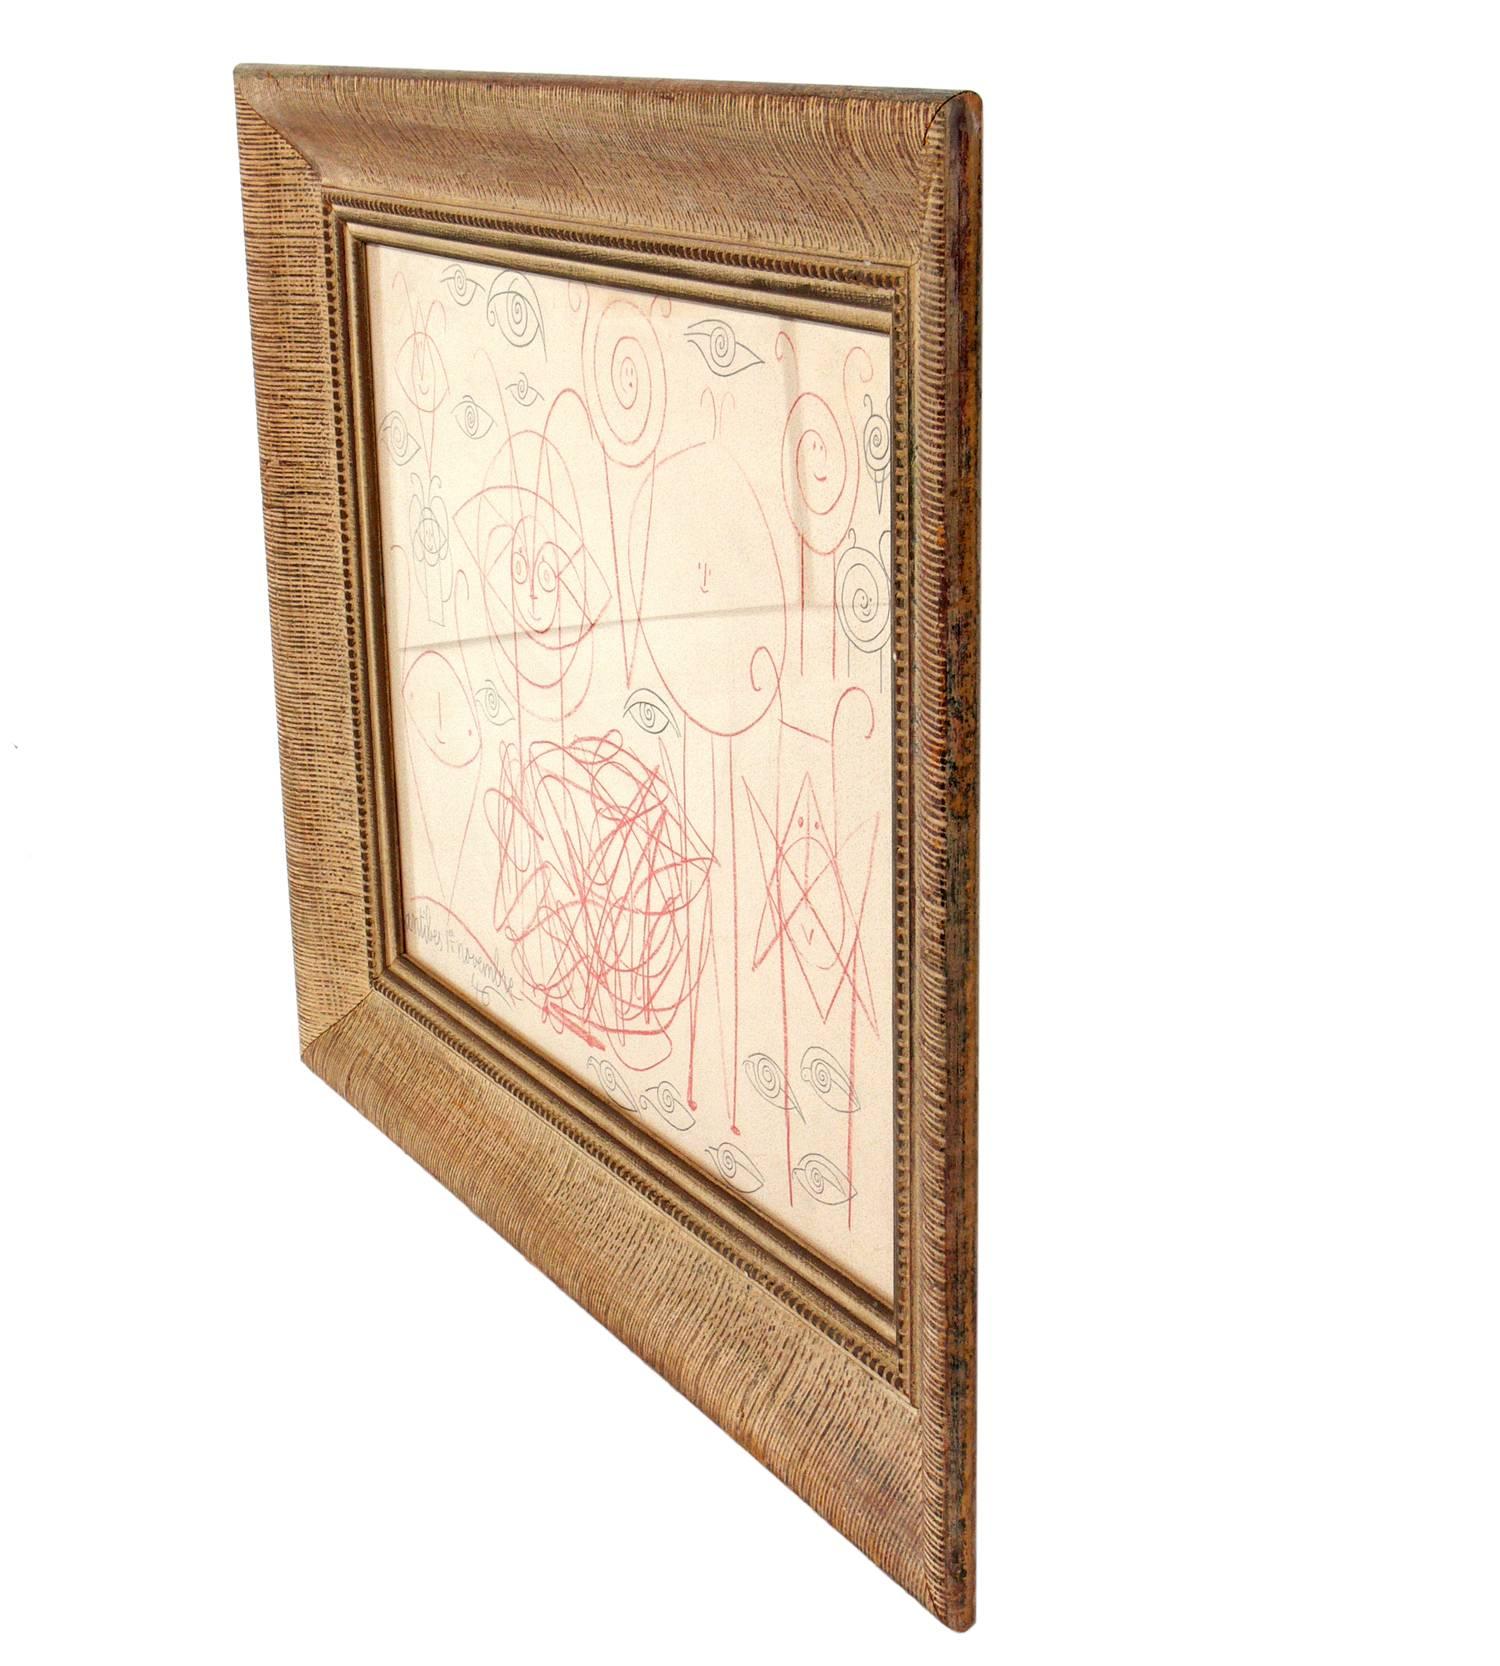 Vintage abstract color lithograph, after an original drawing by Pablo Picasso, from the limited edition portfolio 